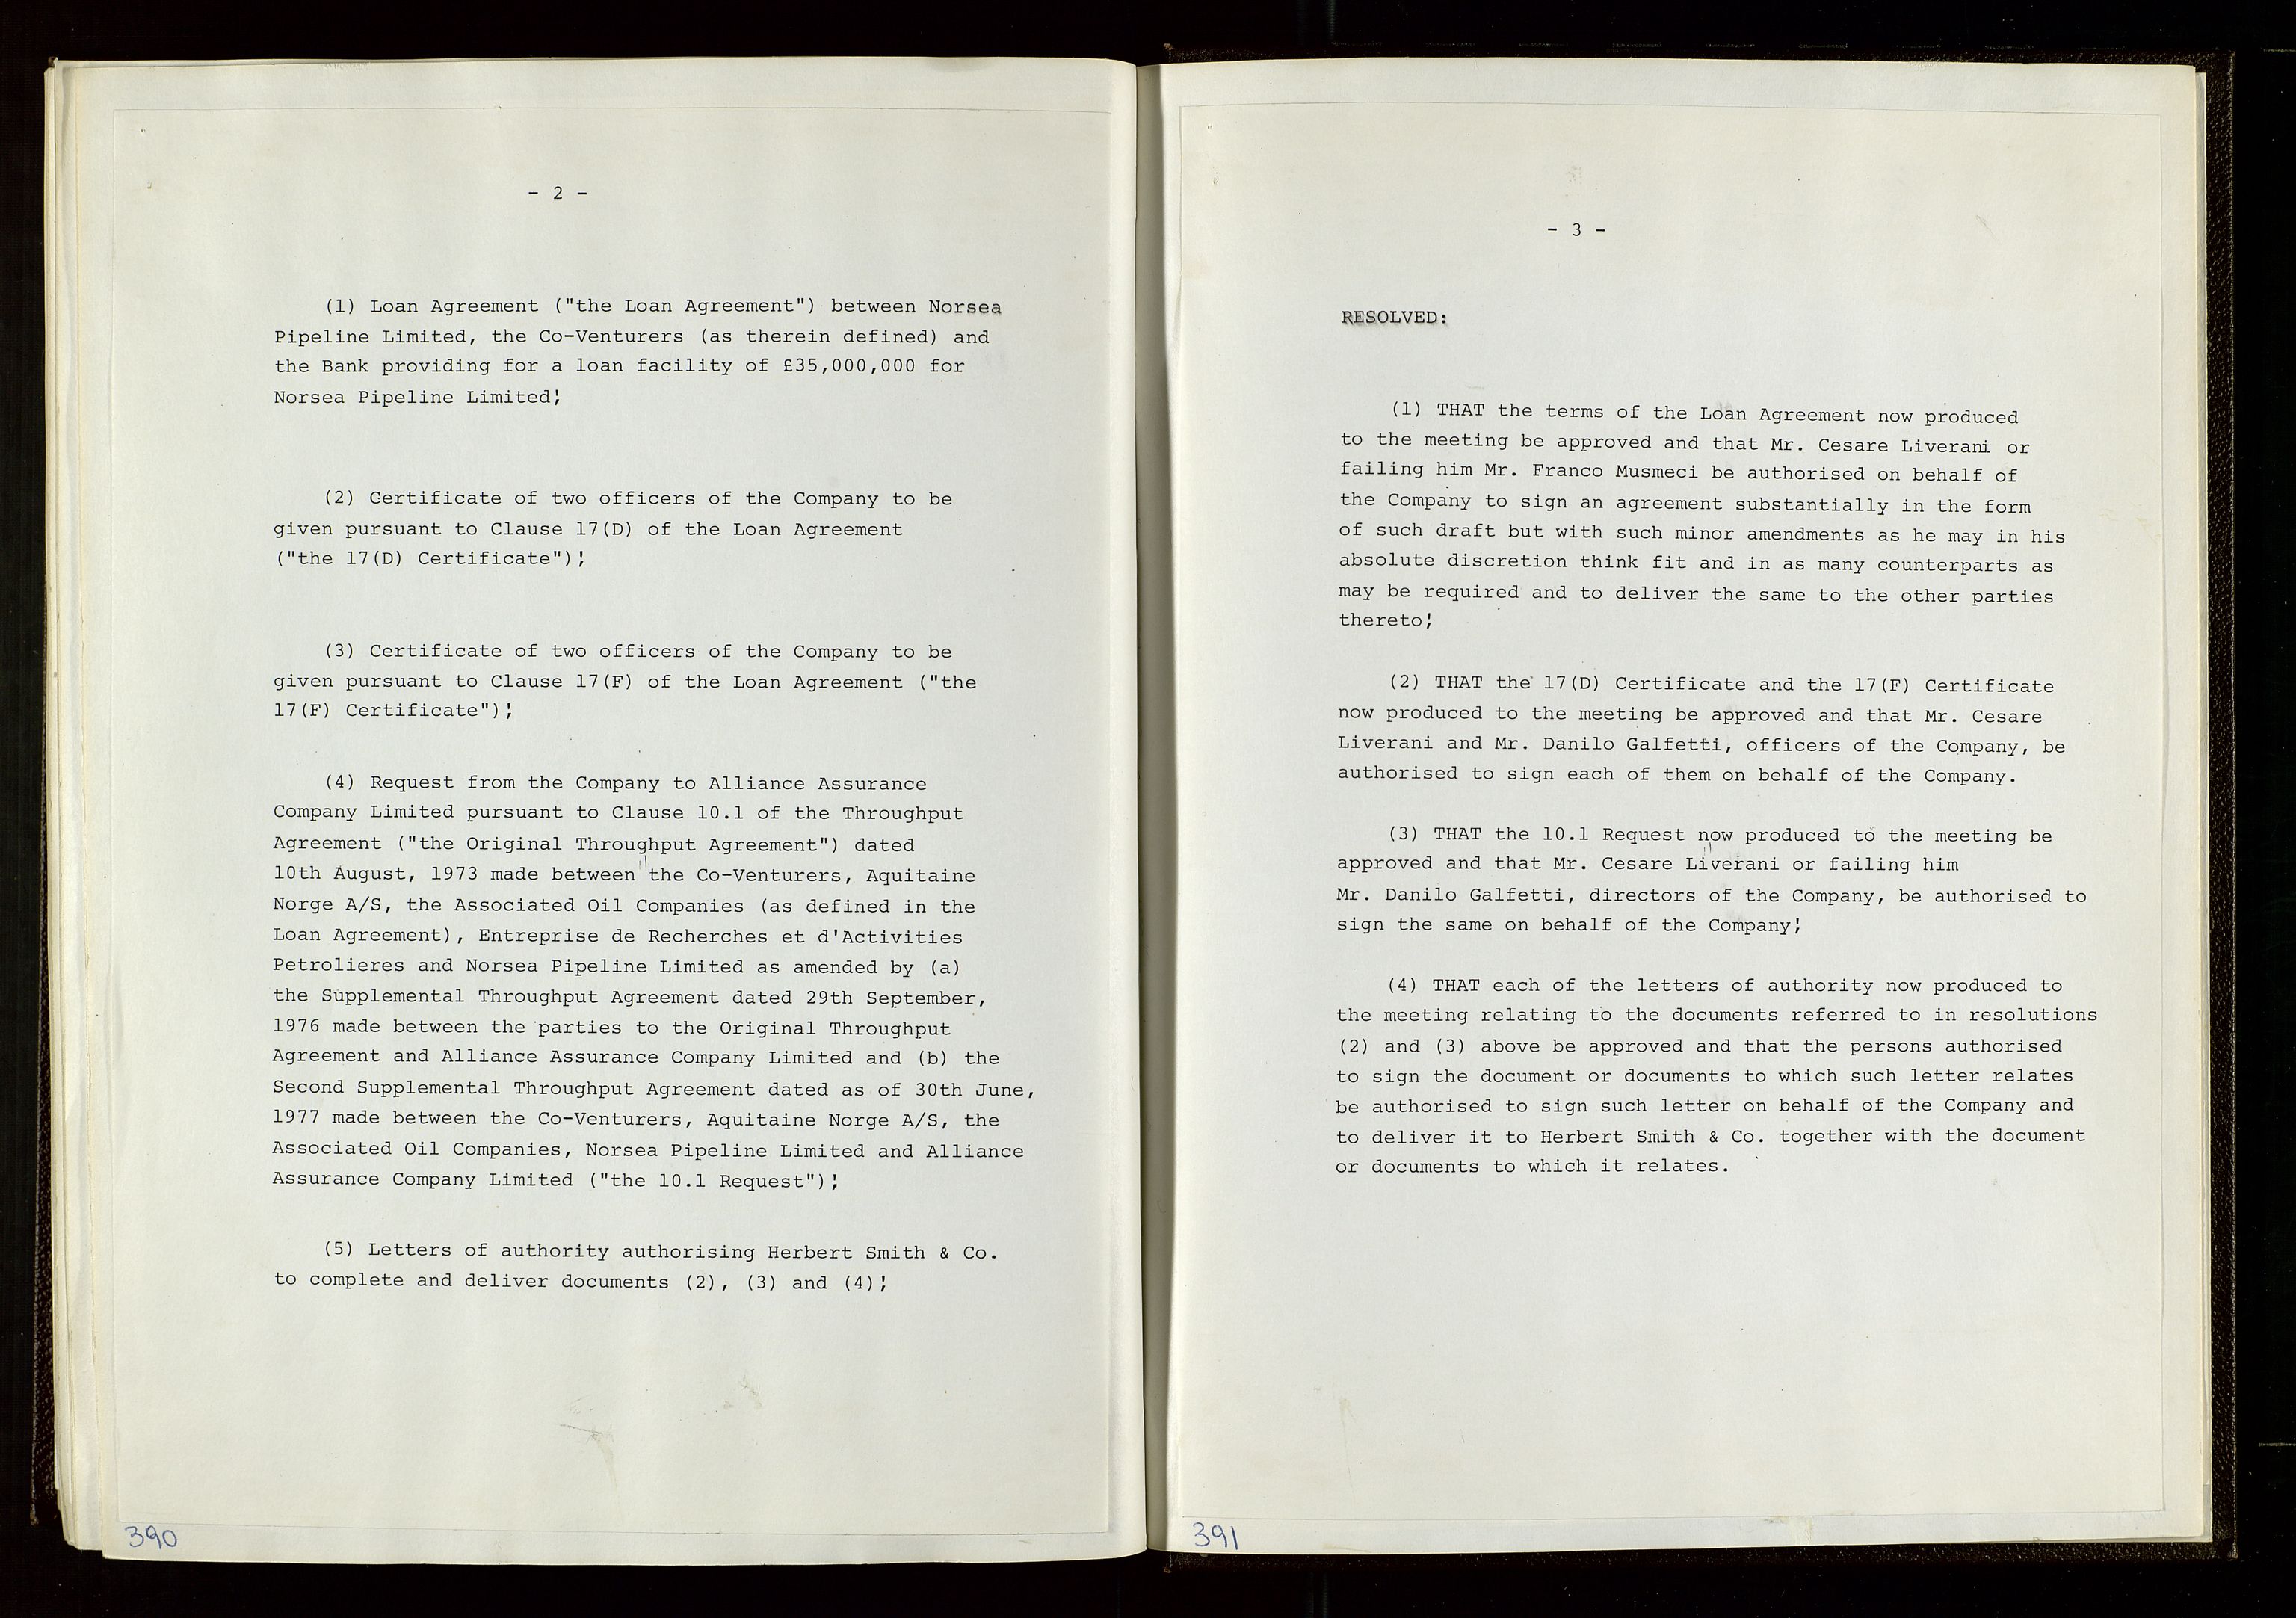 Pa 1583 - Norsk Agip AS, SAST/A-102138/A/Aa/L0002: General assembly and Board of Directors meeting minutes, 1972-1979, p. 390-391